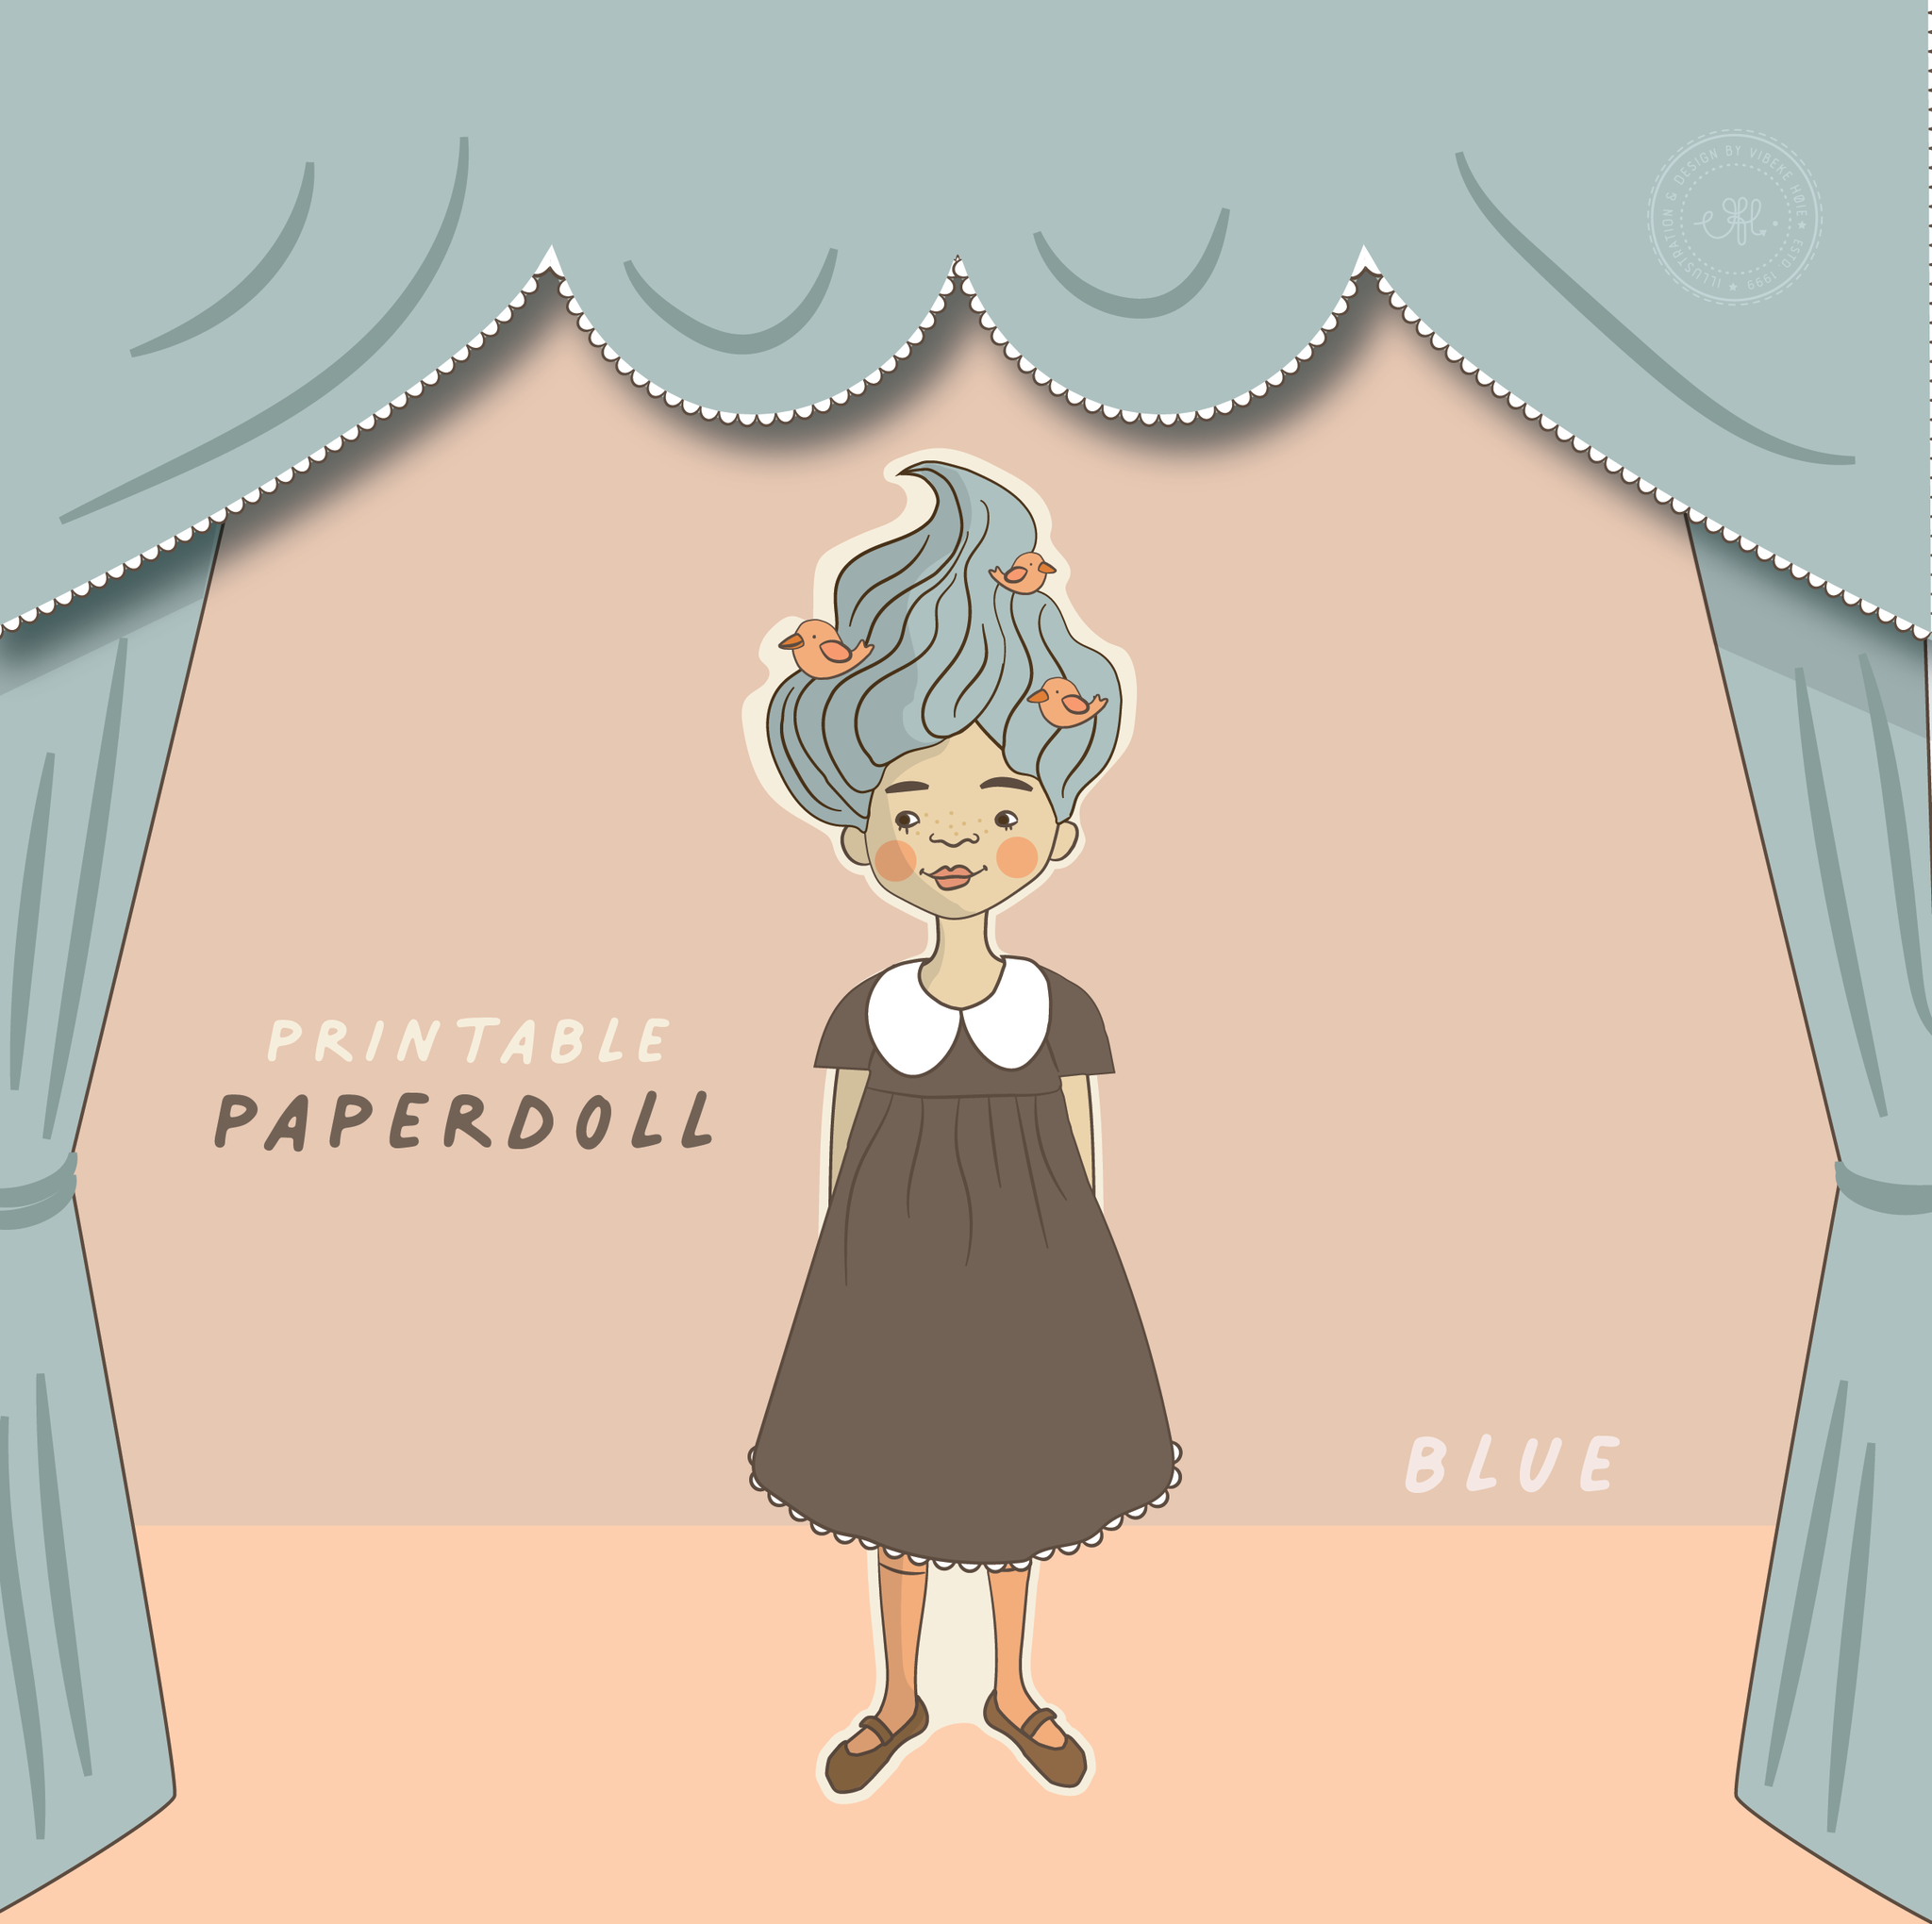 The Paperdoll - Blue